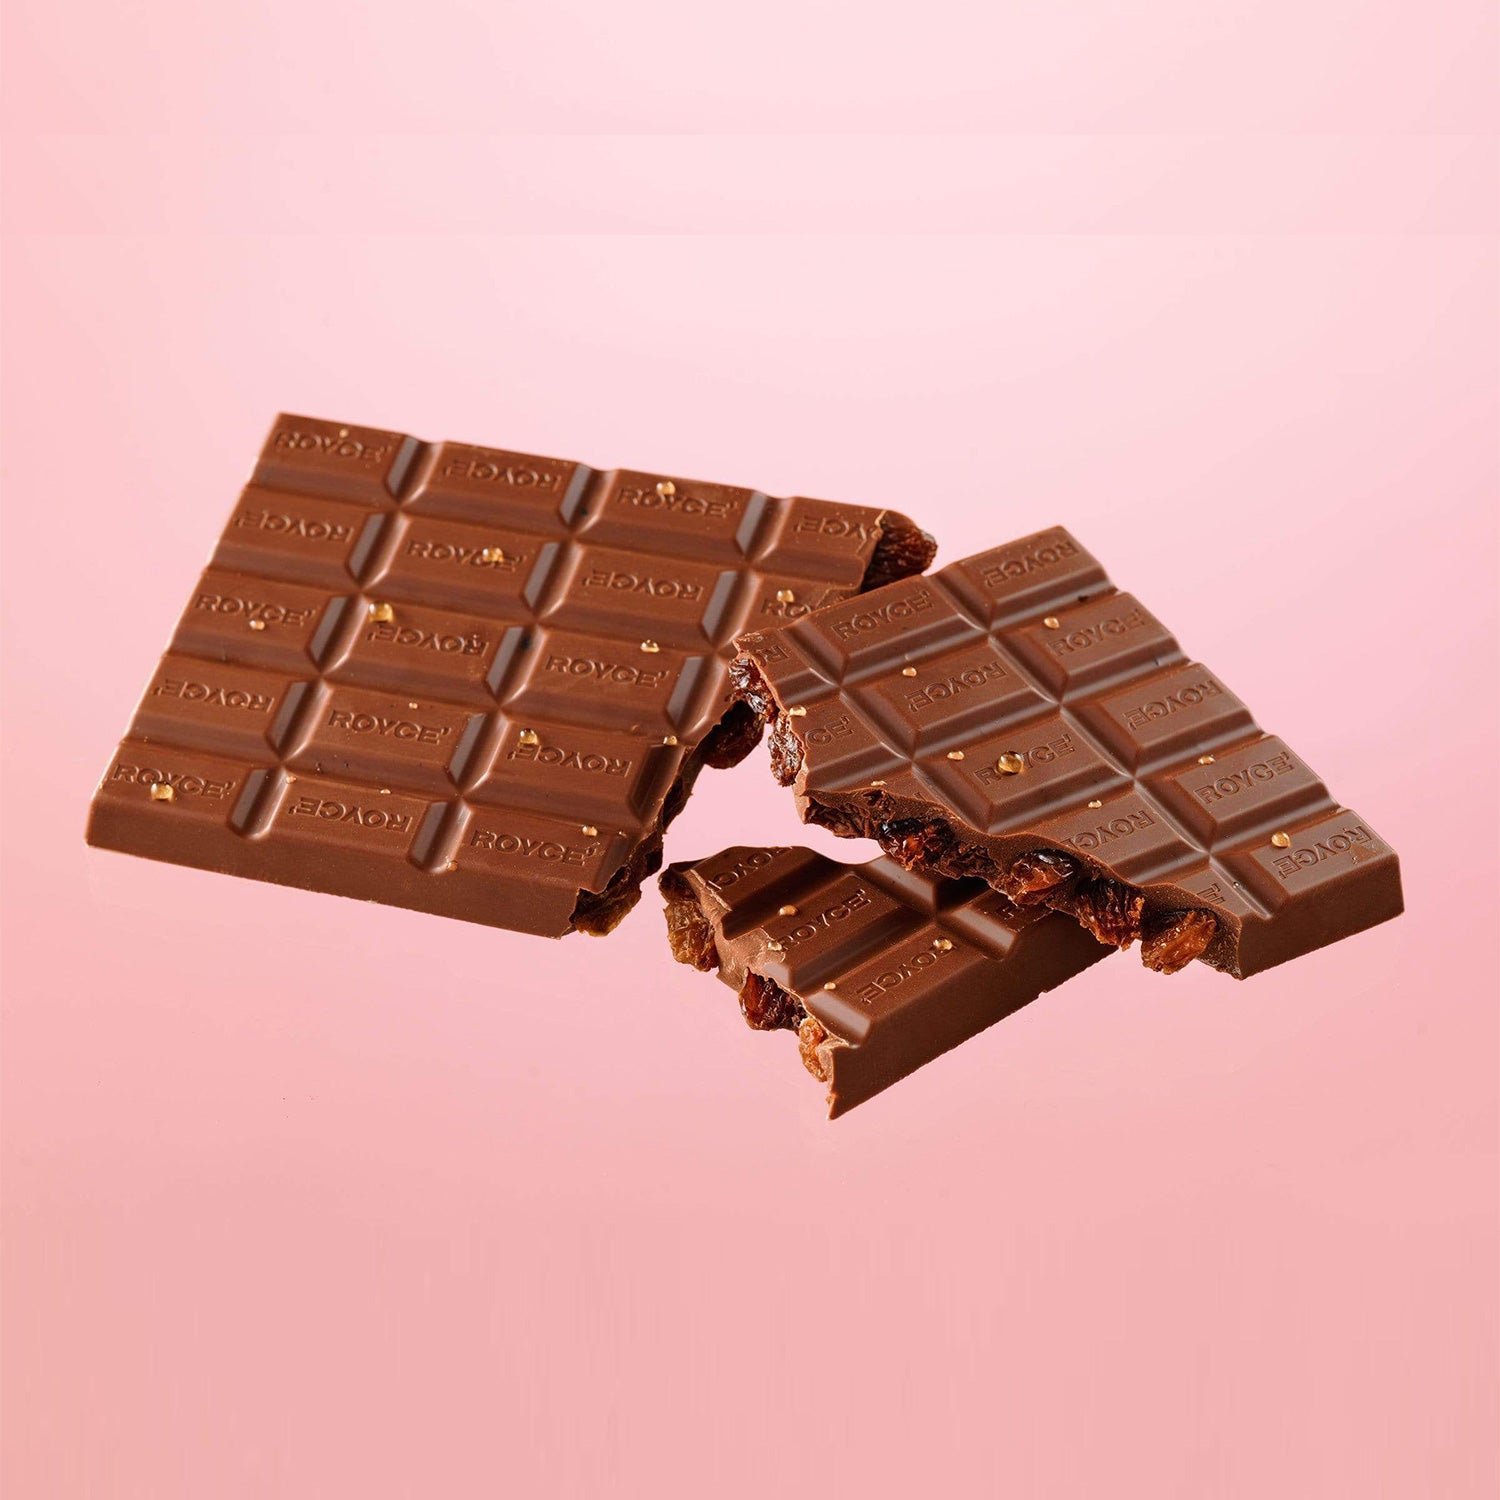 ROYCE' Chocolate - Chocolate Bar "Cognac & Raisin" - Image shows brown chocolate bars with the word ROYCE' engraved multiple times on each. Background is in light pink color.